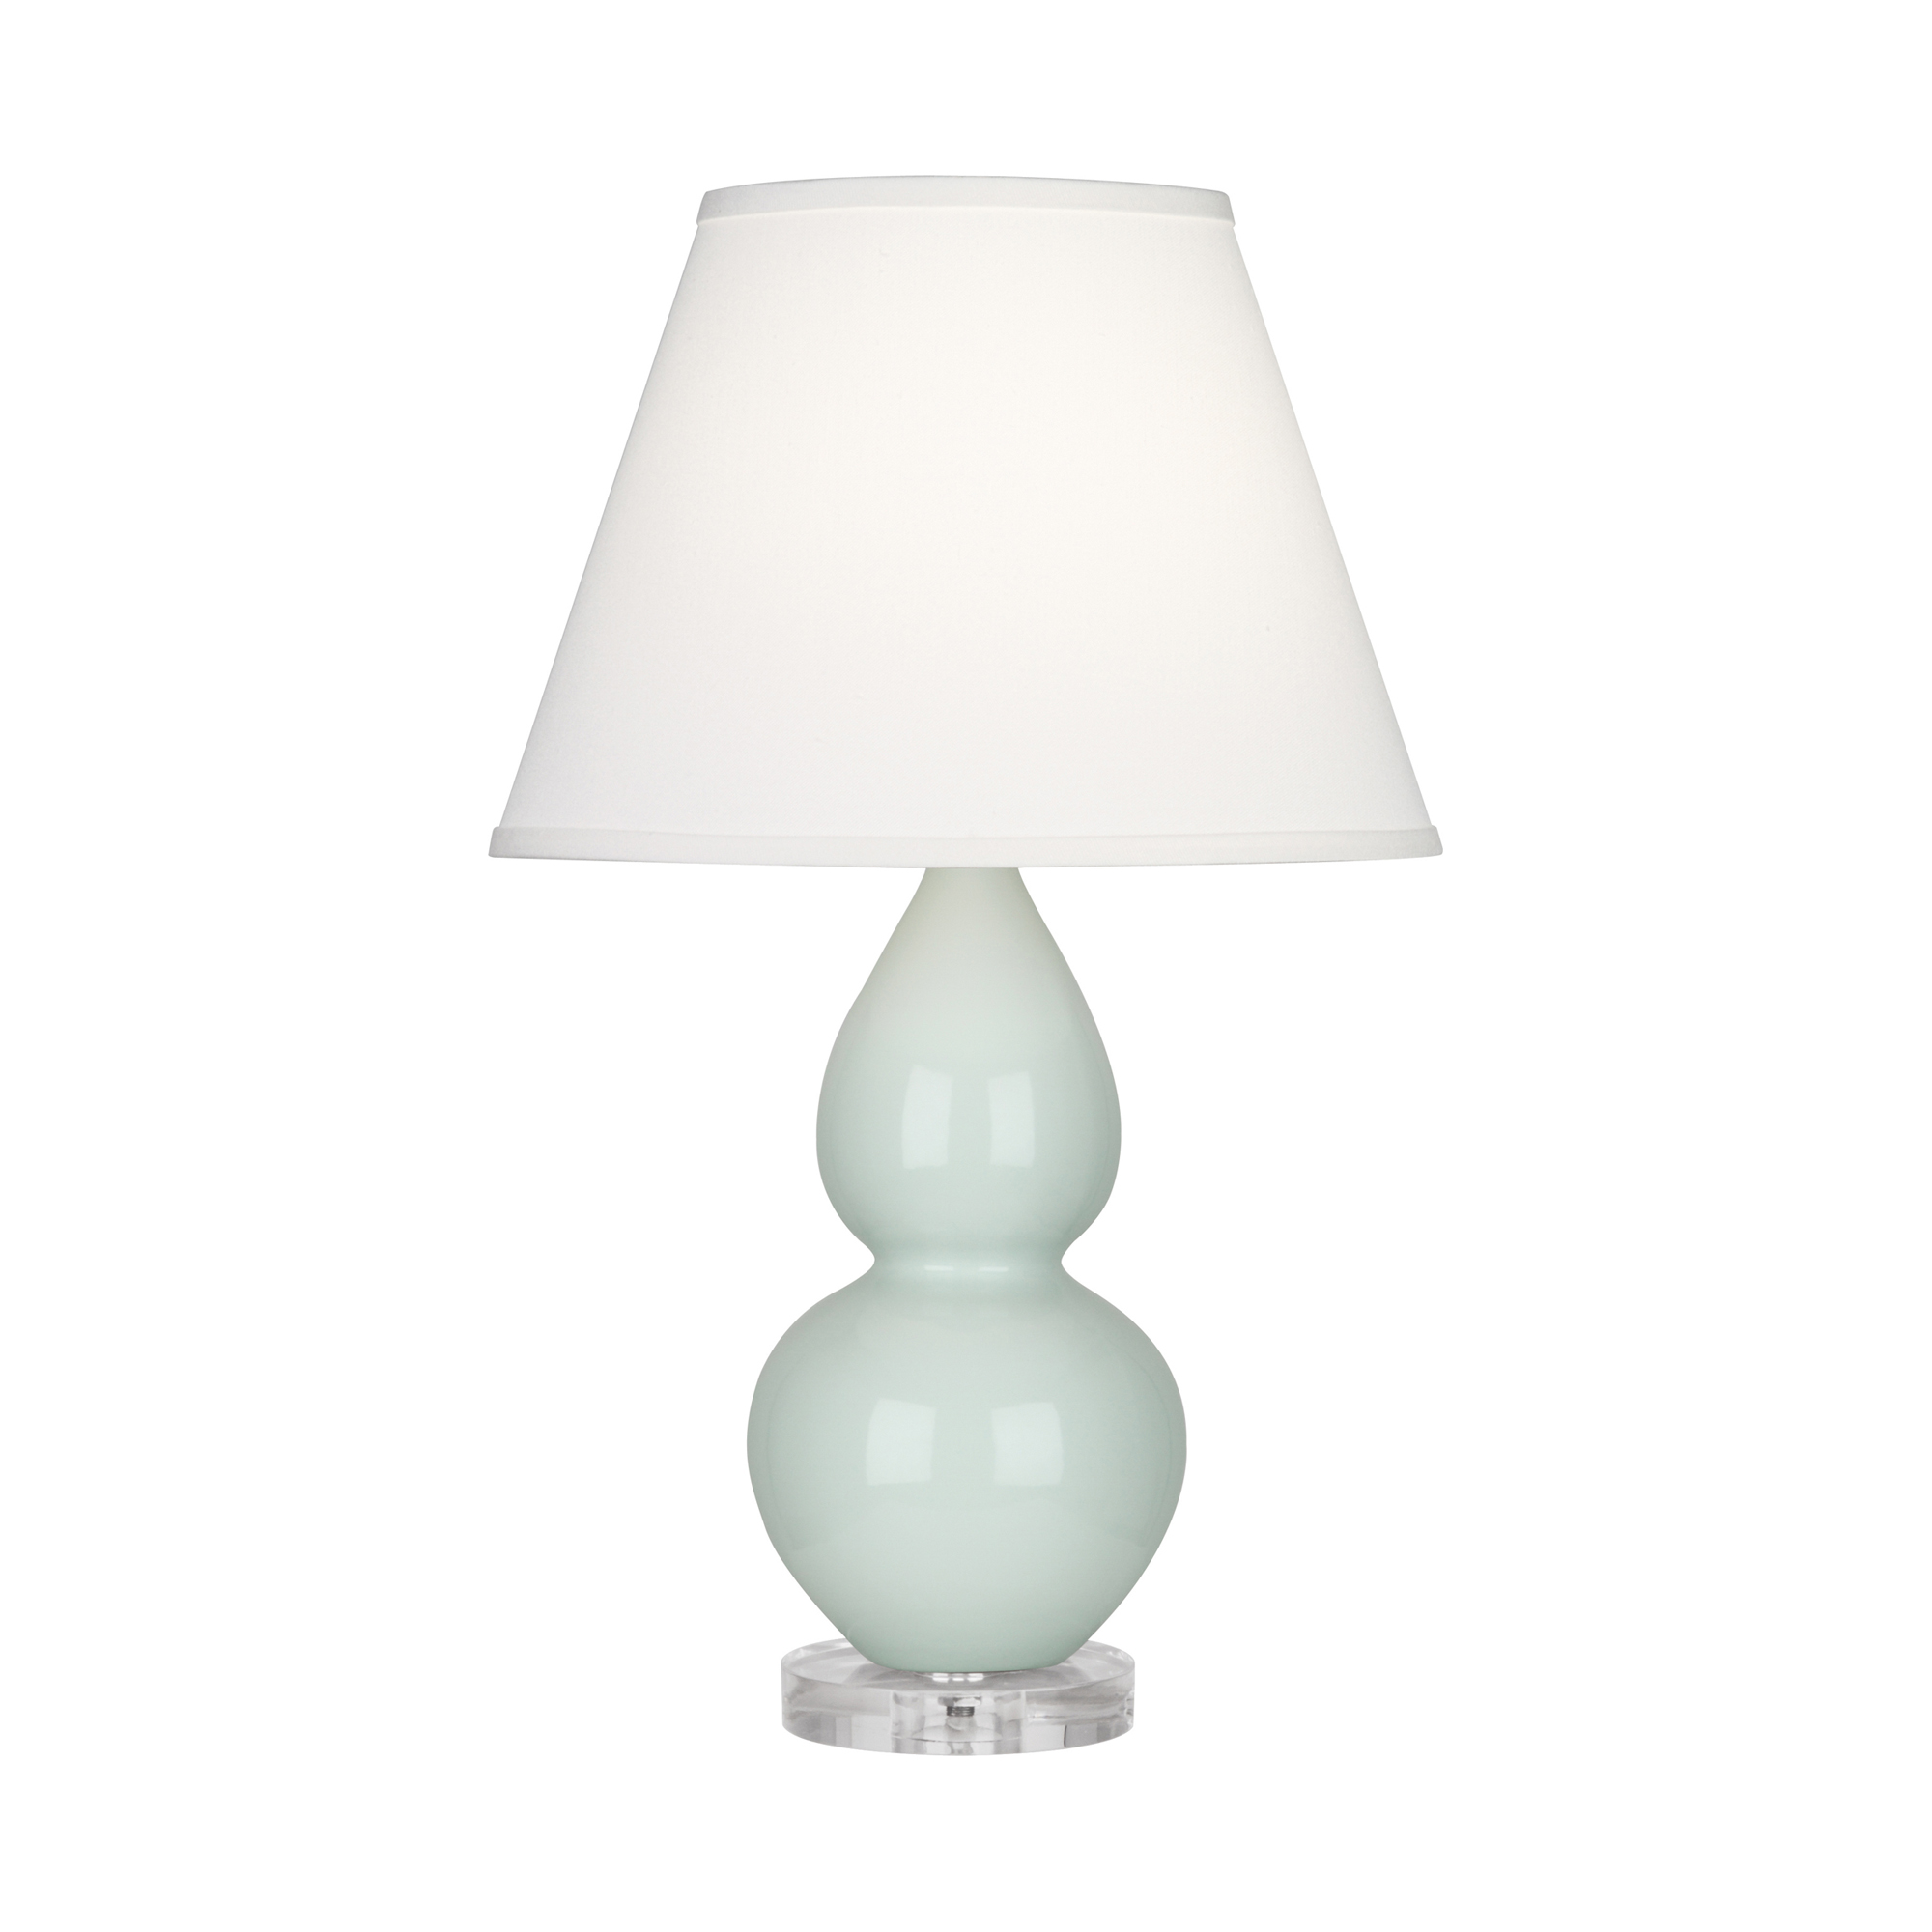 Small Double Gourd Accent Lamp Style #A788X